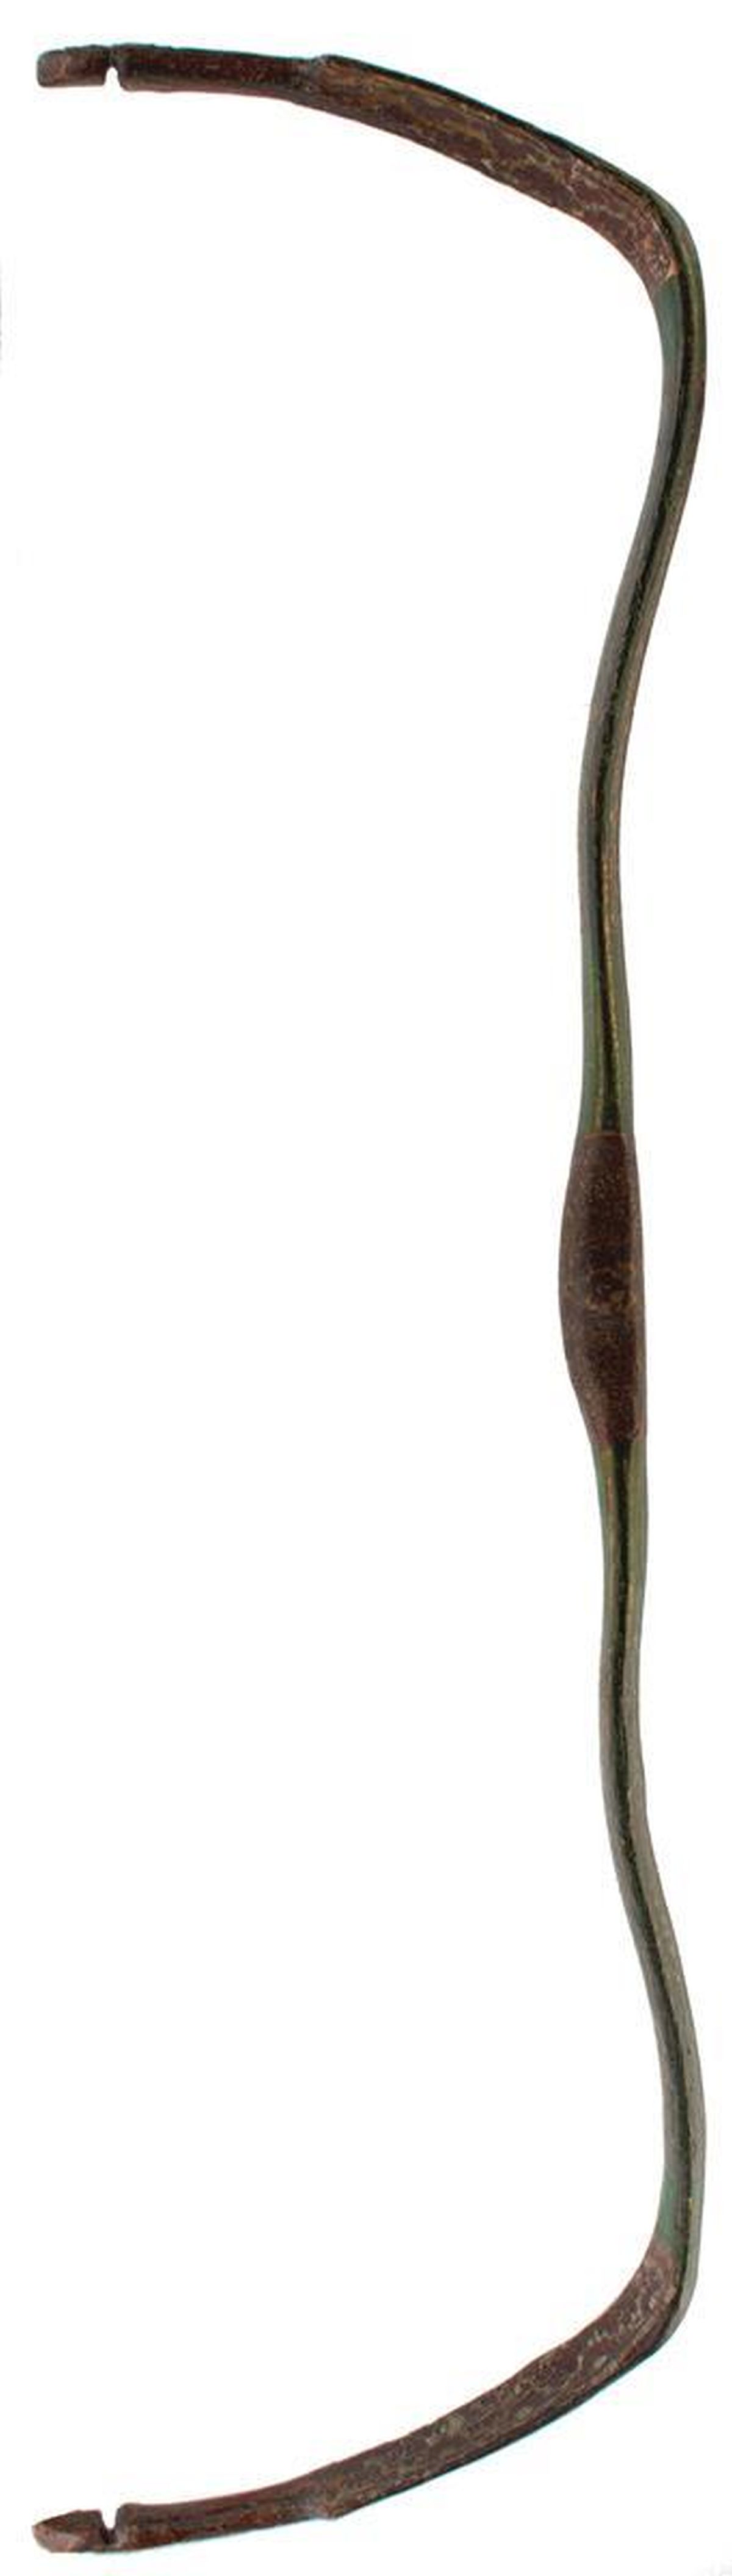 A LATE 18TH CENTURY INDIAN MUGHAL PERIOD LACQUERED WOODEN BOW, of characteristic recurved form,